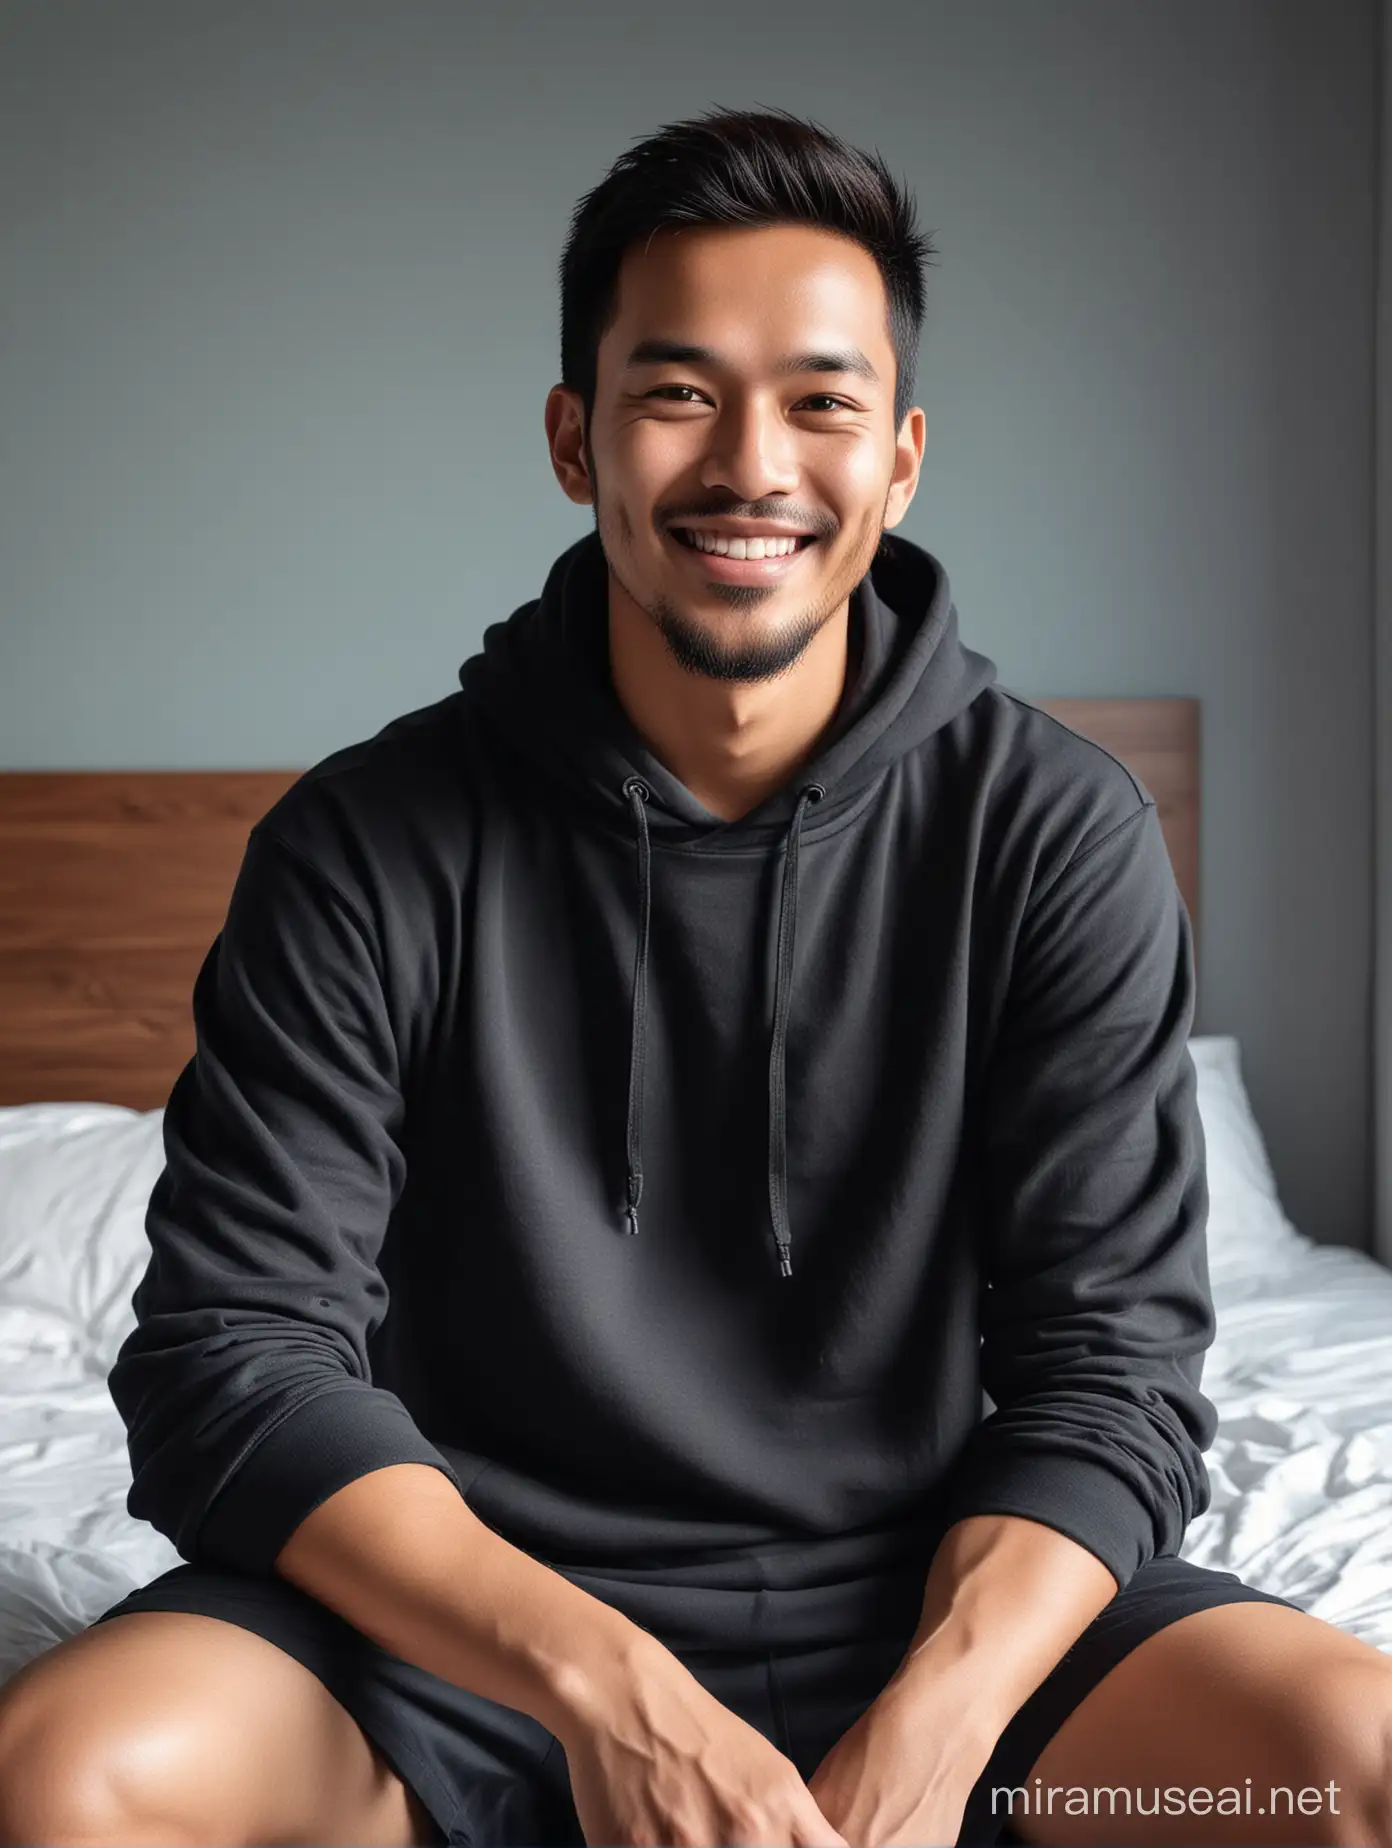 A handsome man with an Indonesian face, a thin beard, short hair and a neat, slightly fat body, wearing a plain black hoodie and black shorts.  He was smiling while sitting on the edge of the bed in the room.  the background of the room walls is light blue.  The photo looks very realistic and super detailed